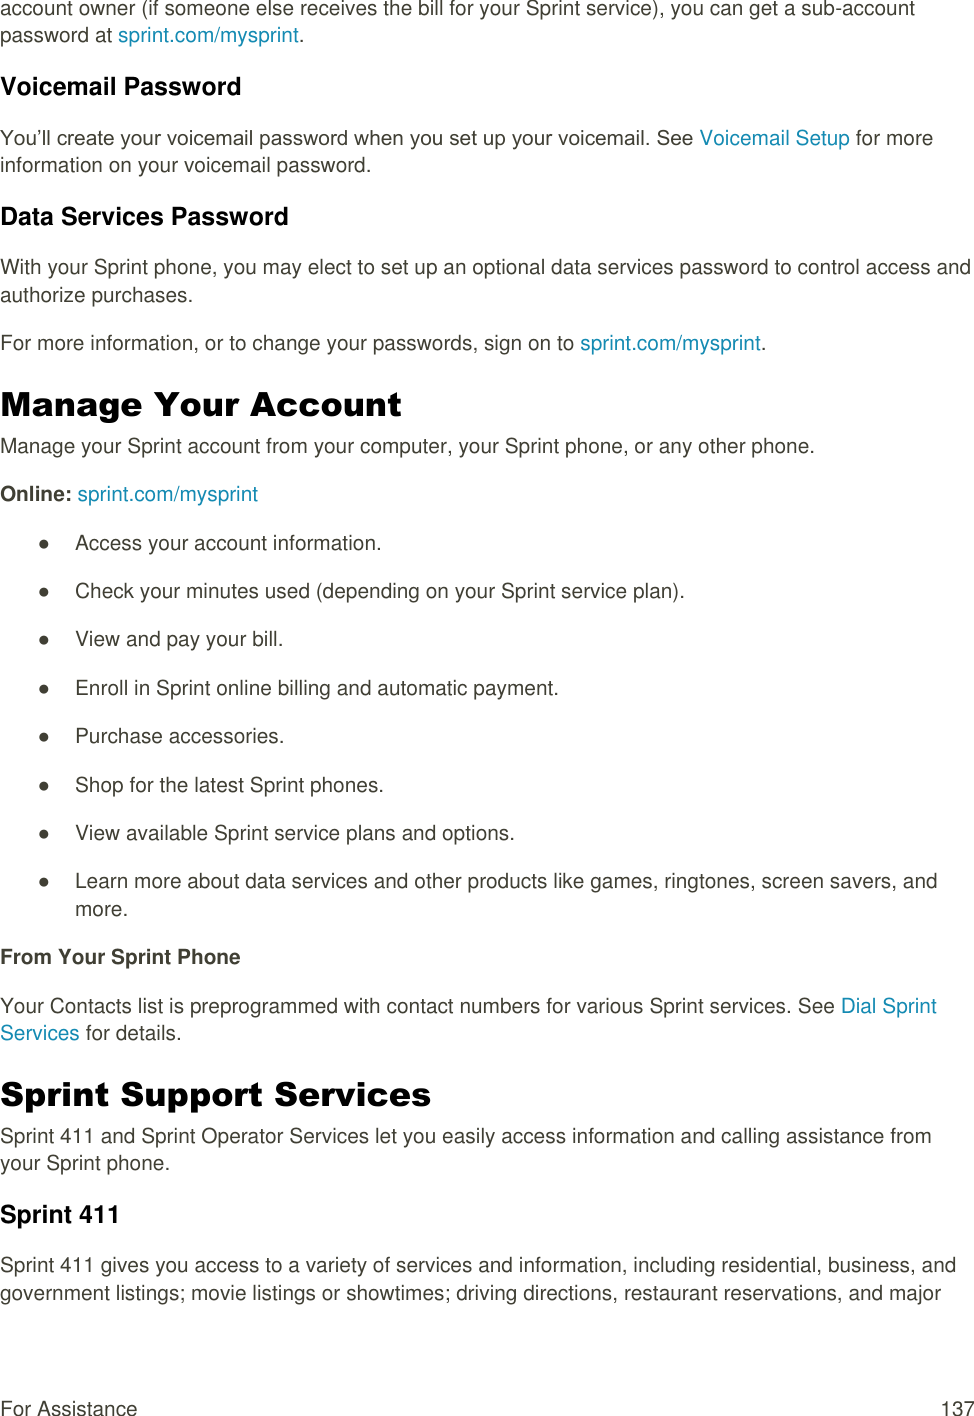  For Assistance  137 account owner (if someone else receives the bill for your Sprint service), you can get a sub-account password at sprint.com/mysprint. Voicemail Password You’ll create your voicemail password when you set up your voicemail. See Voicemail Setup for more information on your voicemail password. Data Services Password With your Sprint phone, you may elect to set up an optional data services password to control access and authorize purchases. For more information, or to change your passwords, sign on to sprint.com/mysprint. Manage Your Account  Manage your Sprint account from your computer, your Sprint phone, or any other phone. Online: sprint.com/mysprint ●  Access your account information. ●  Check your minutes used (depending on your Sprint service plan). ●  View and pay your bill. ●  Enroll in Sprint online billing and automatic payment. ●  Purchase accessories. ●  Shop for the latest Sprint phones. ●  View available Sprint service plans and options. ●  Learn more about data services and other products like games, ringtones, screen savers, and more. From Your Sprint Phone Your Contacts list is preprogrammed with contact numbers for various Sprint services. See Dial Sprint Services for details. Sprint Support Services  Sprint 411 and Sprint Operator Services let you easily access information and calling assistance from your Sprint phone. Sprint 411 Sprint 411 gives you access to a variety of services and information, including residential, business, and government listings; movie listings or showtimes; driving directions, restaurant reservations, and major 